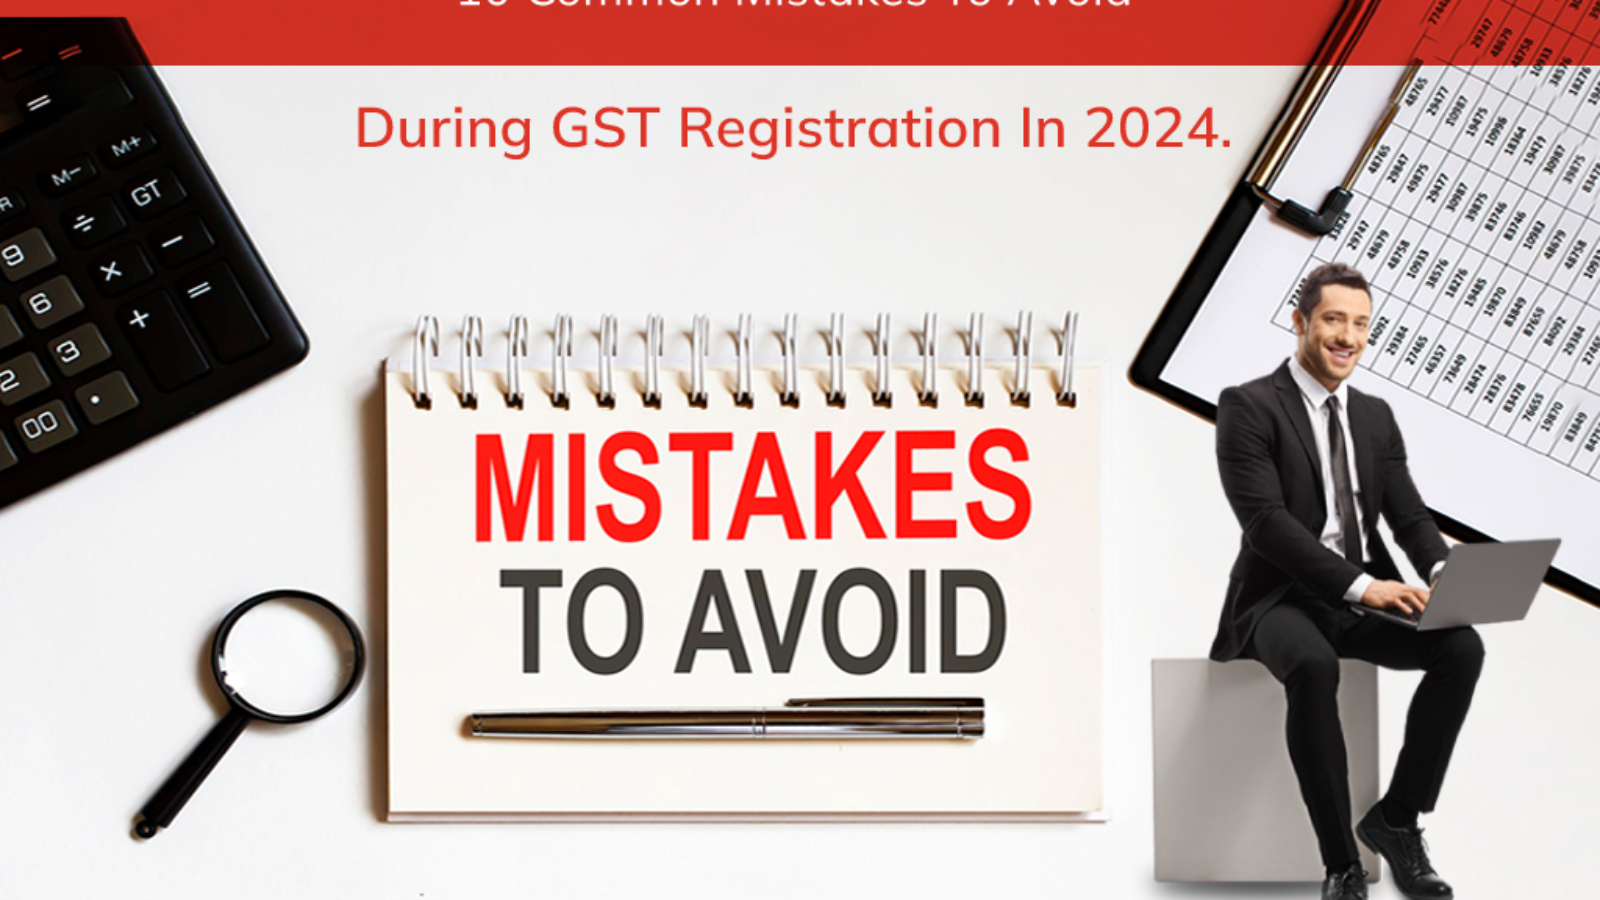 10 Common Mistakes to Avoid During GST Registration in 2024